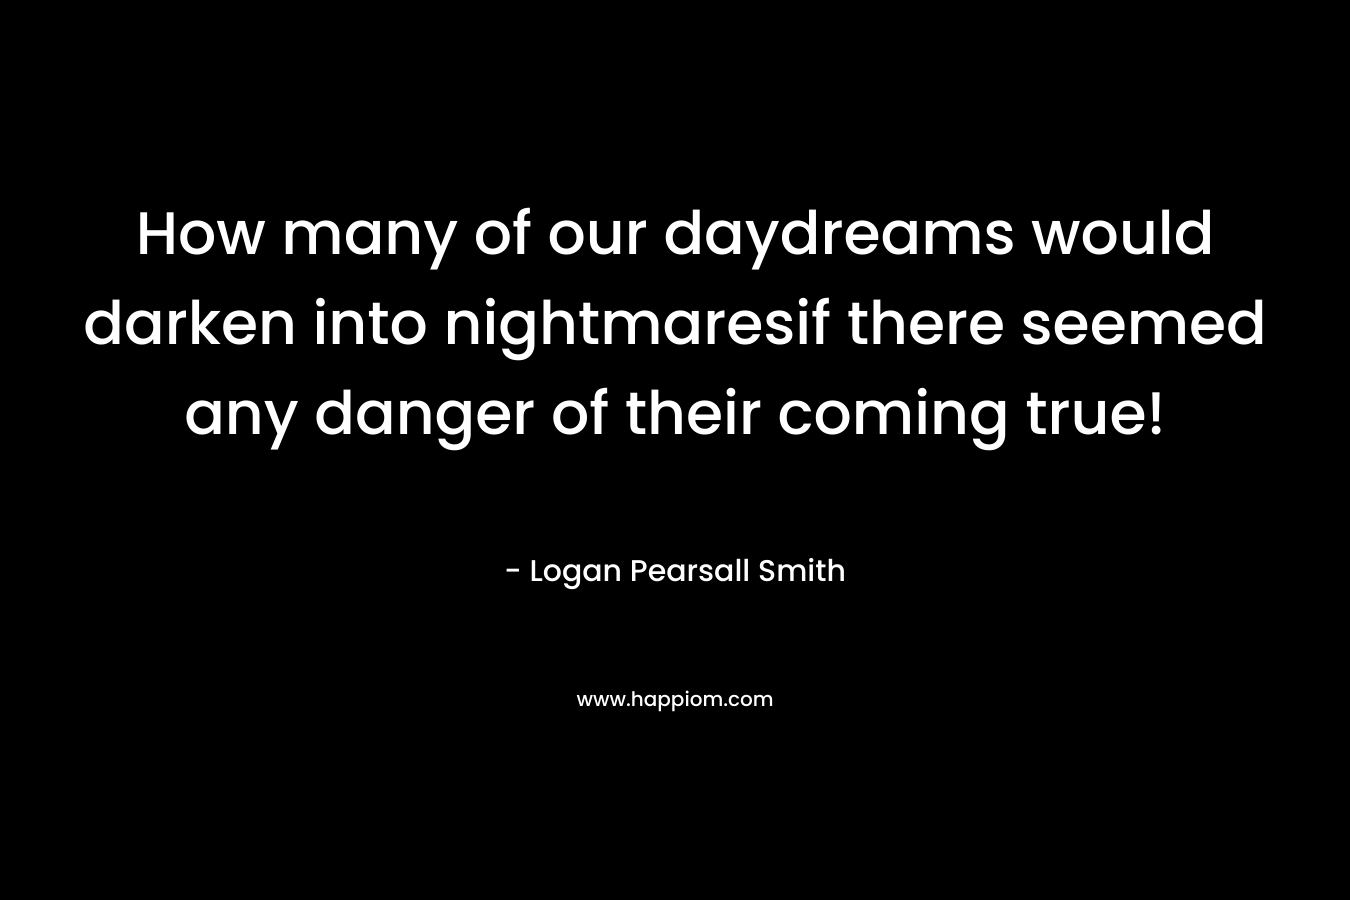 How many of our daydreams would darken into nightmaresif there seemed any danger of their coming true!